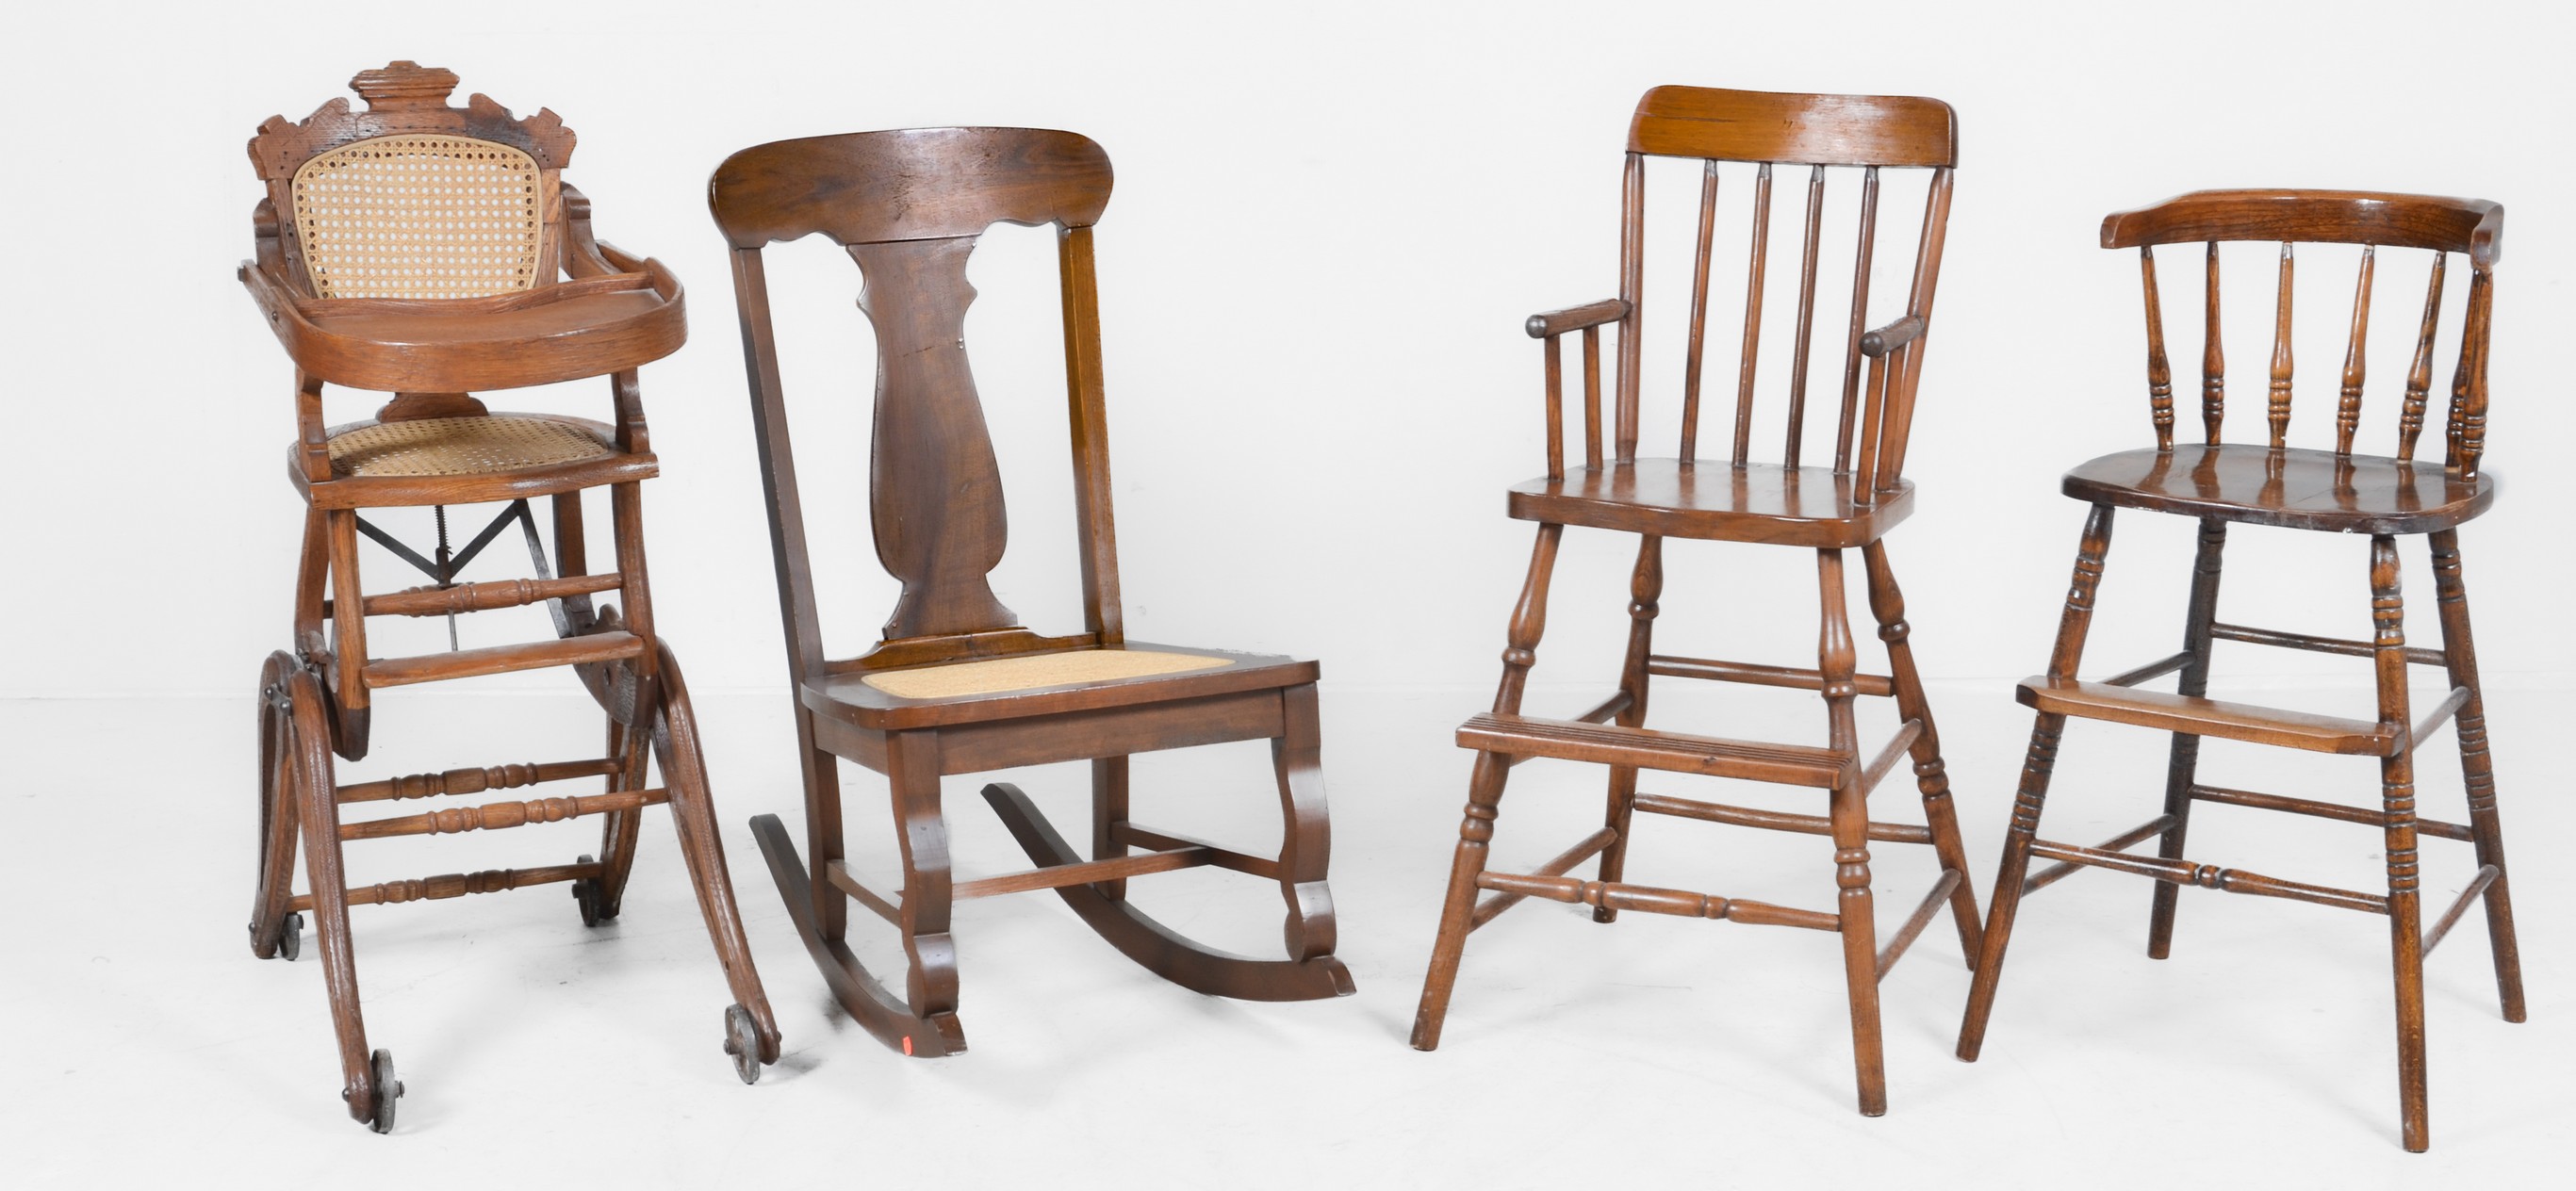 (4) Child's chairs, c/o Victorian